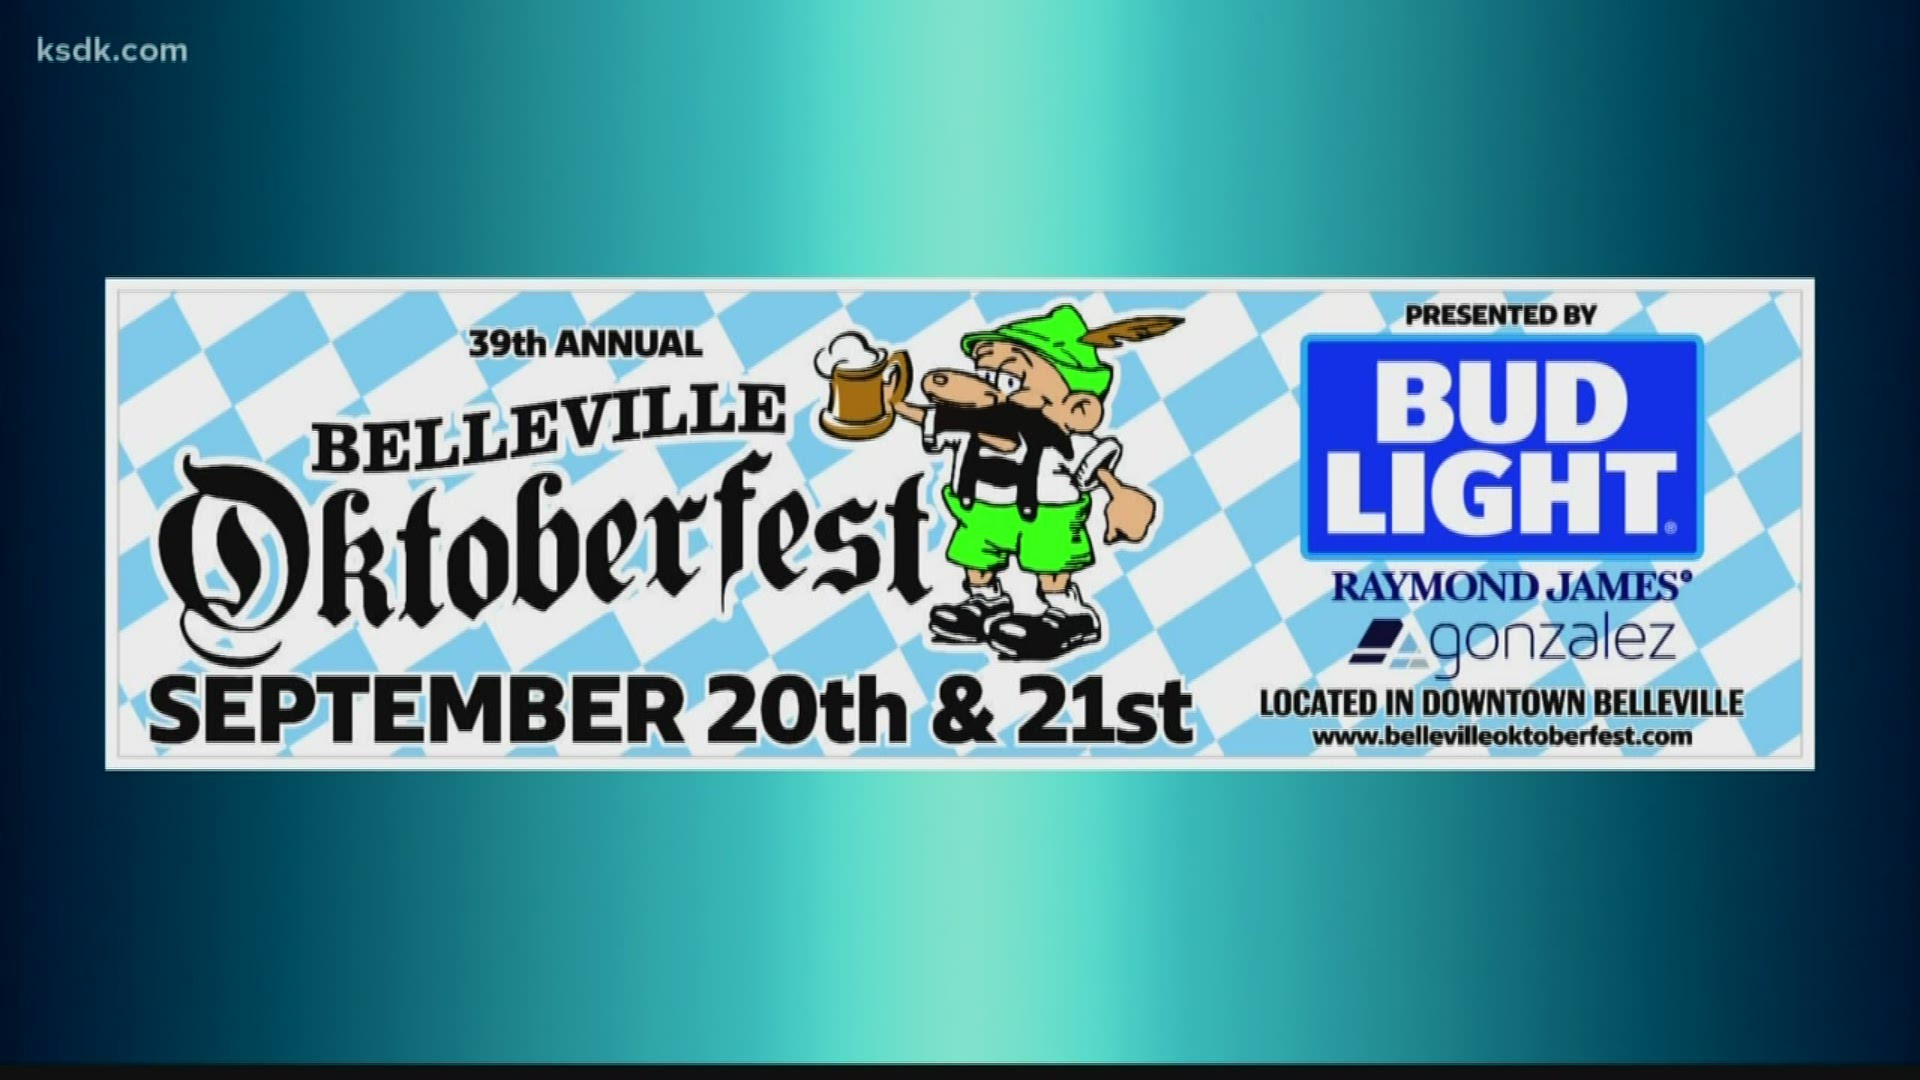 Don’t miss out on all the fun and food and beer at the 39th Annual Belleville Oktoberfest!